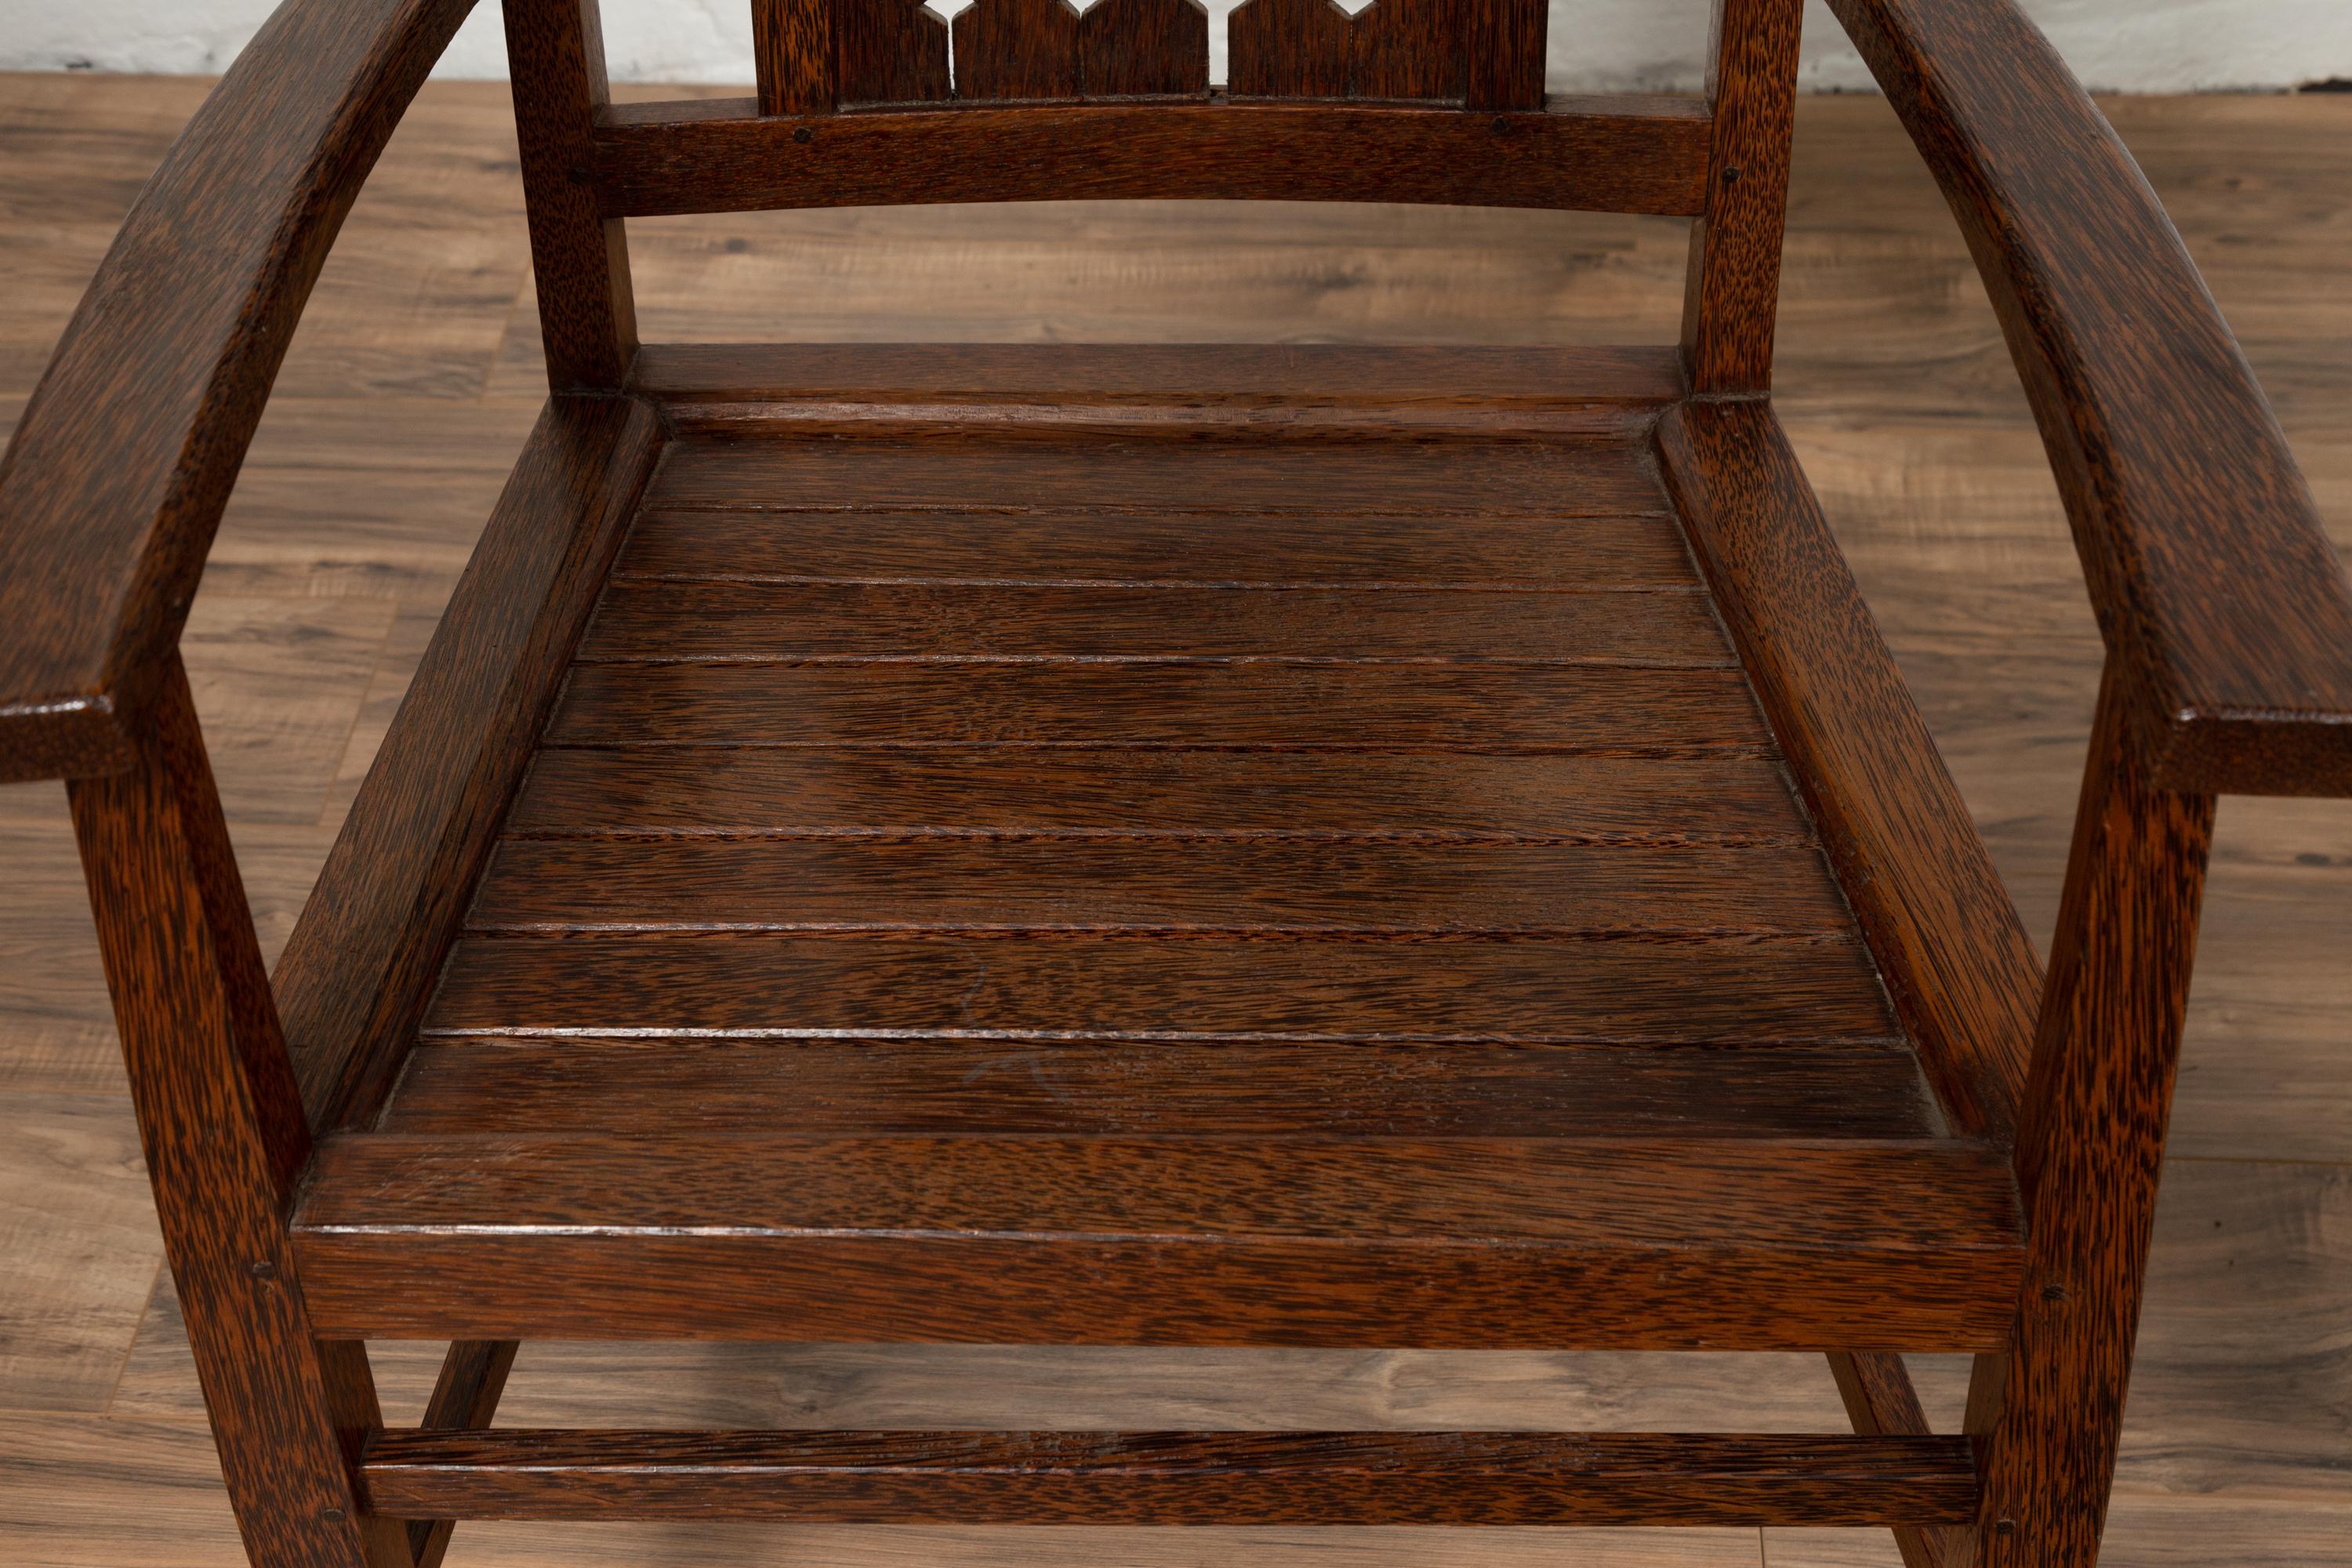 Vintage Dutch Colonial Armchair with Pierced Wooden Slats and Bonnet-Style Rail For Sale 2